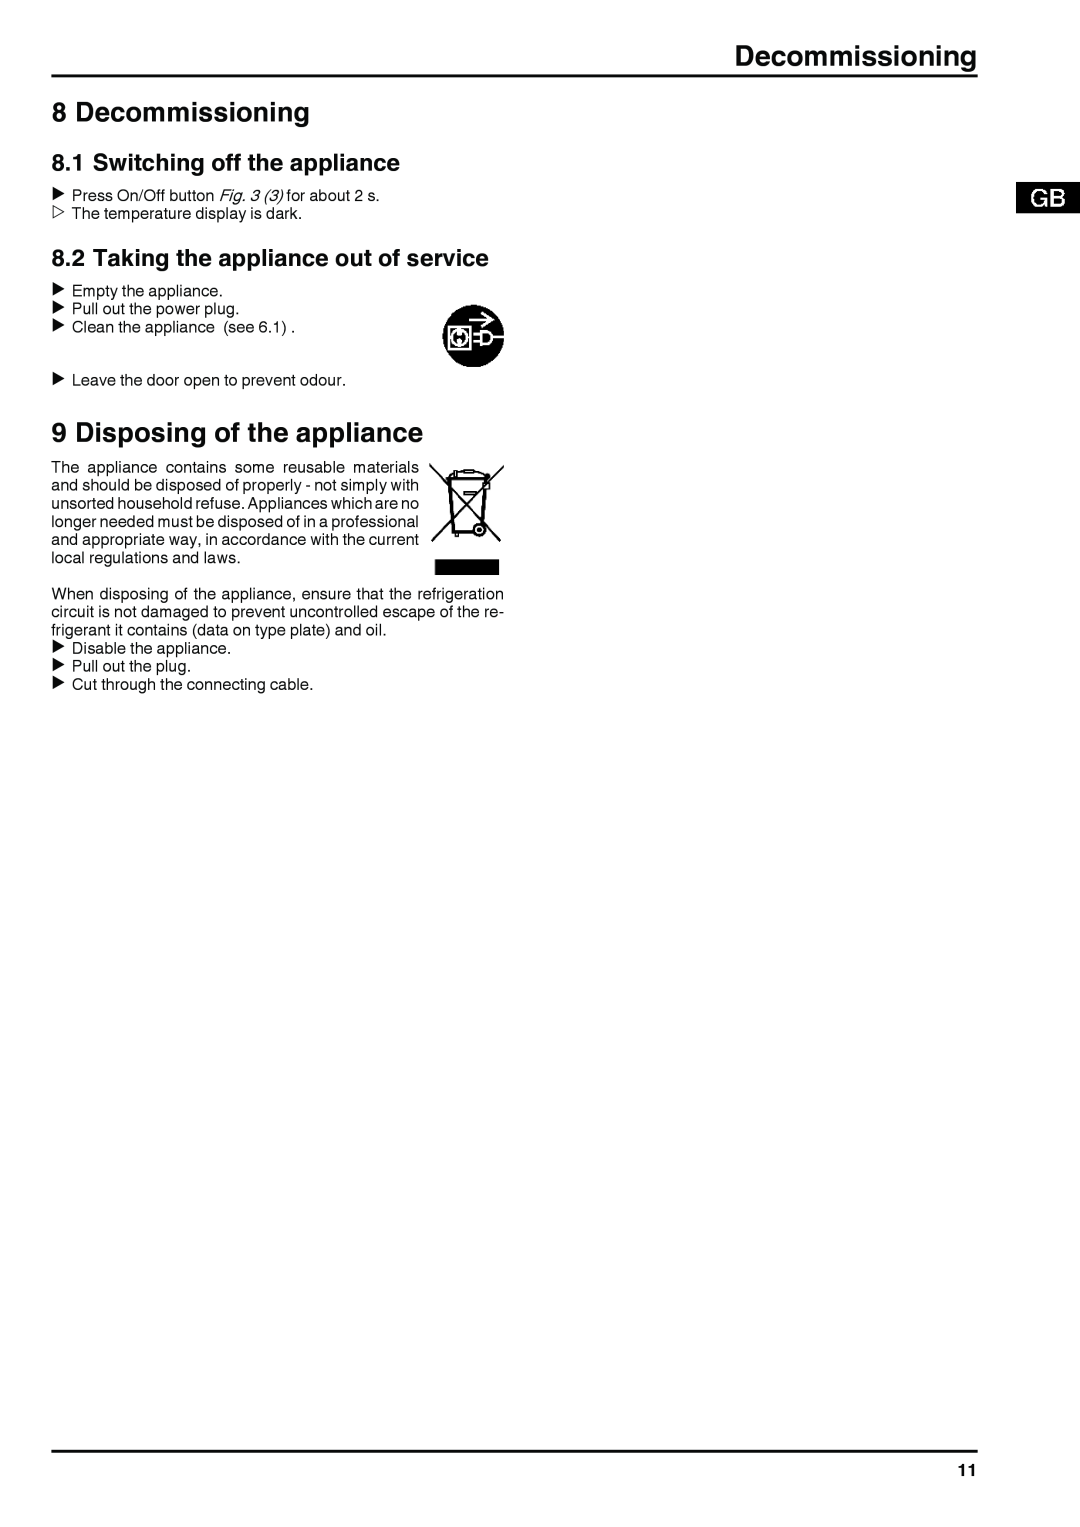 Liebherr 120309 7084442 - 00 Decommissioning, Disposing of the appliance, Switching off the appliance 